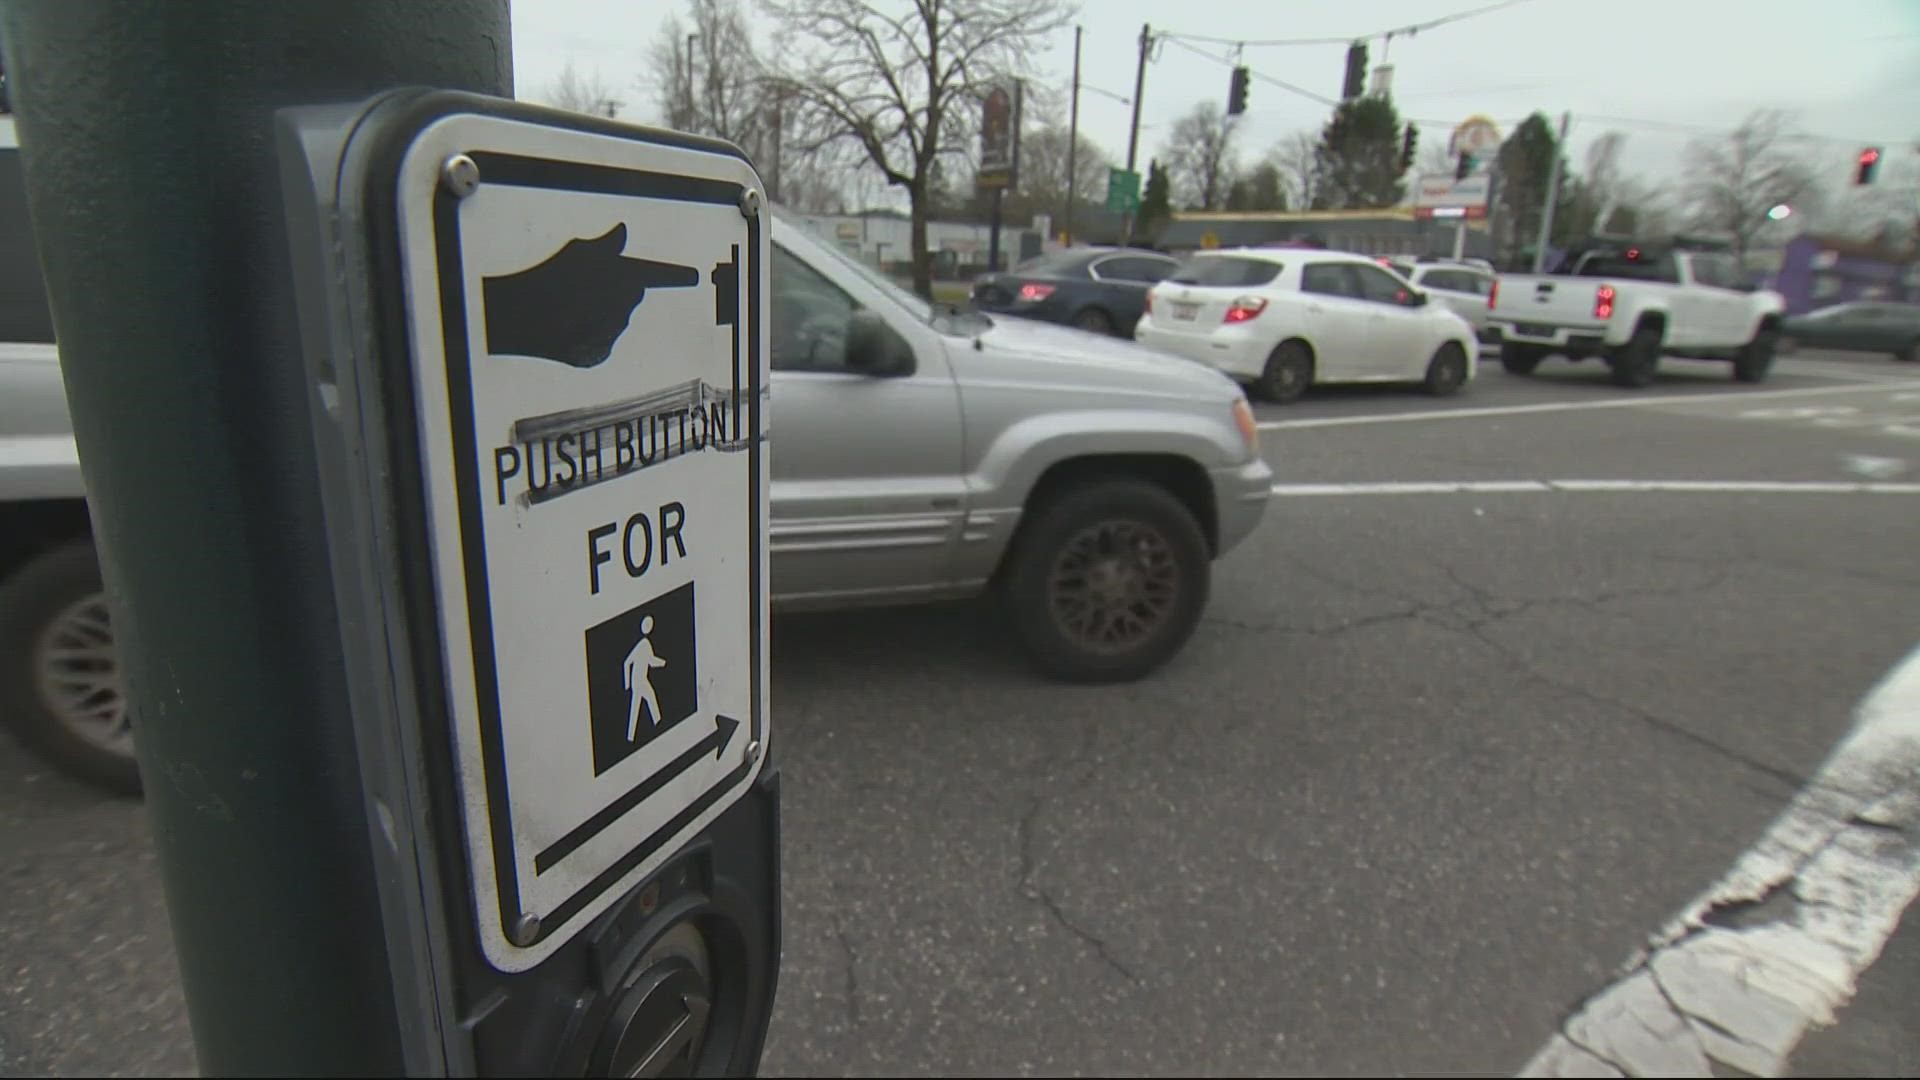 Portland police responded to reports of a pedestrian hit by a car Tuesday night in Southeast Portland. The pedestrian died despite life-saving efforts by paramedics.